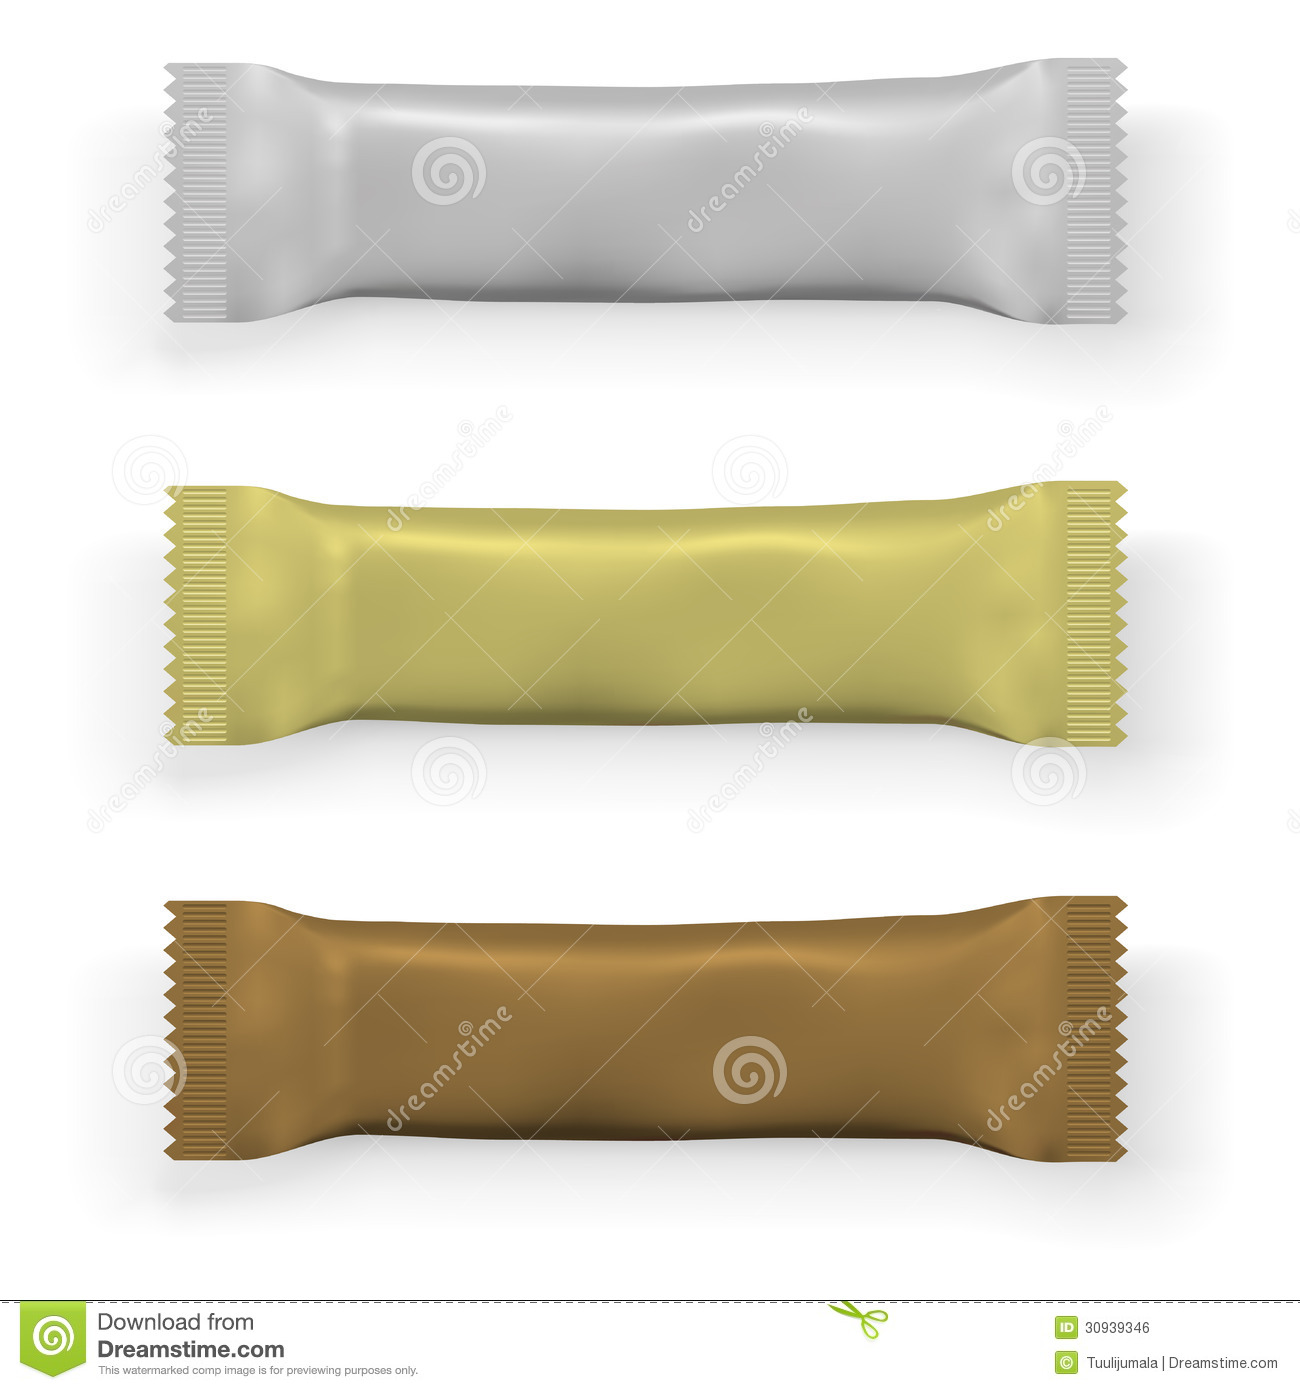 Blank Chocolate Or Protein Bar Packaging Template On White Background